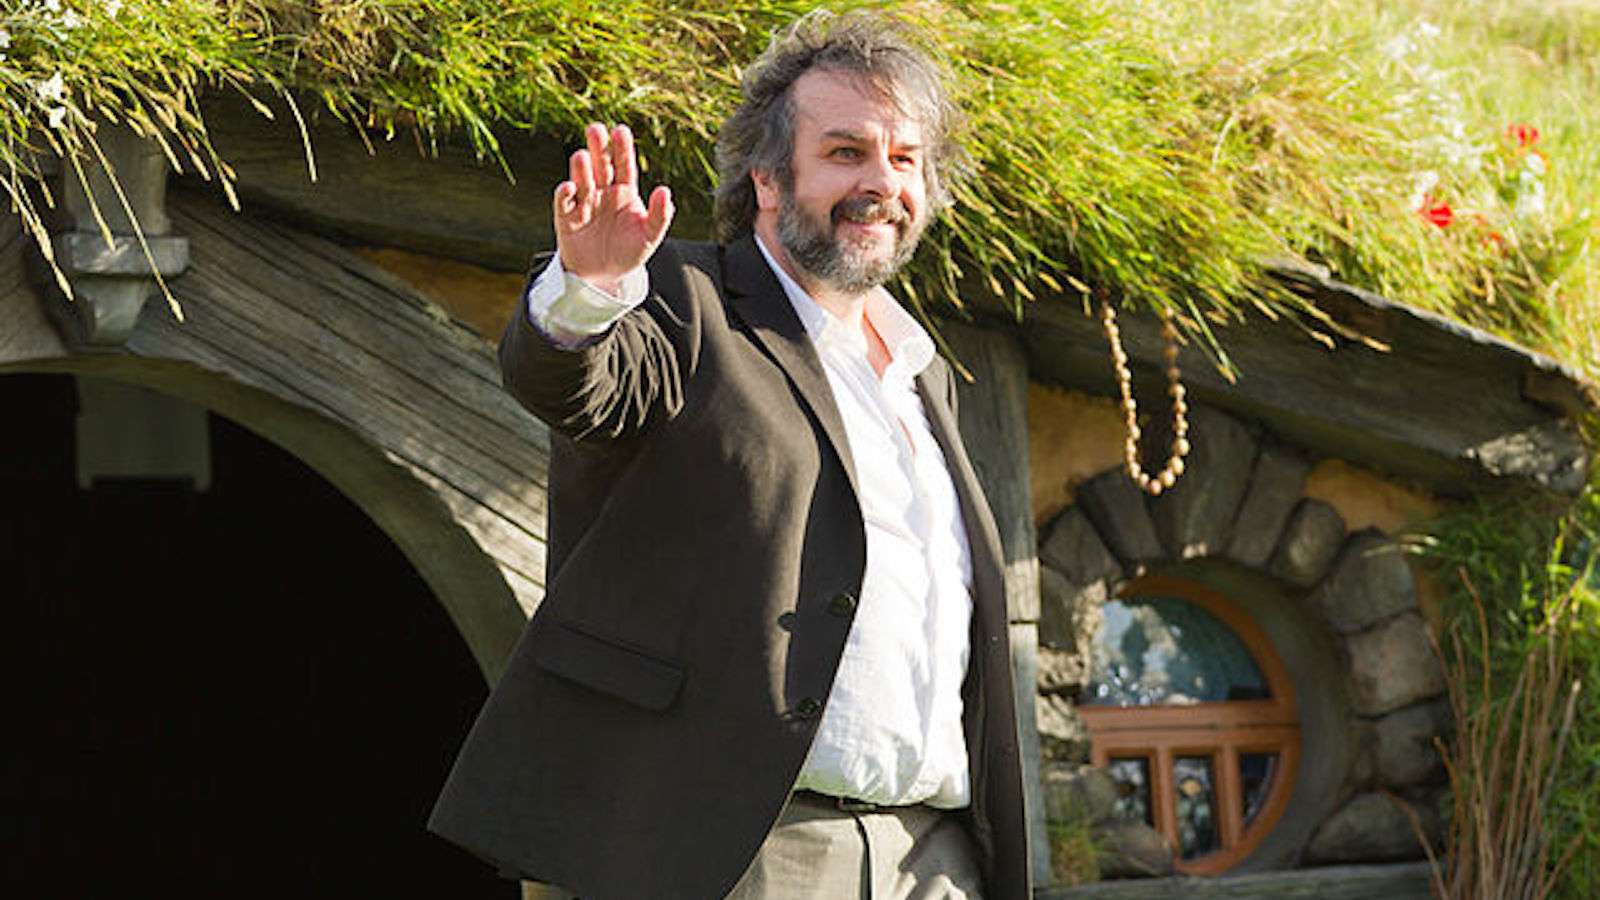 Peter Jackson at the world premiere of The Hobbit